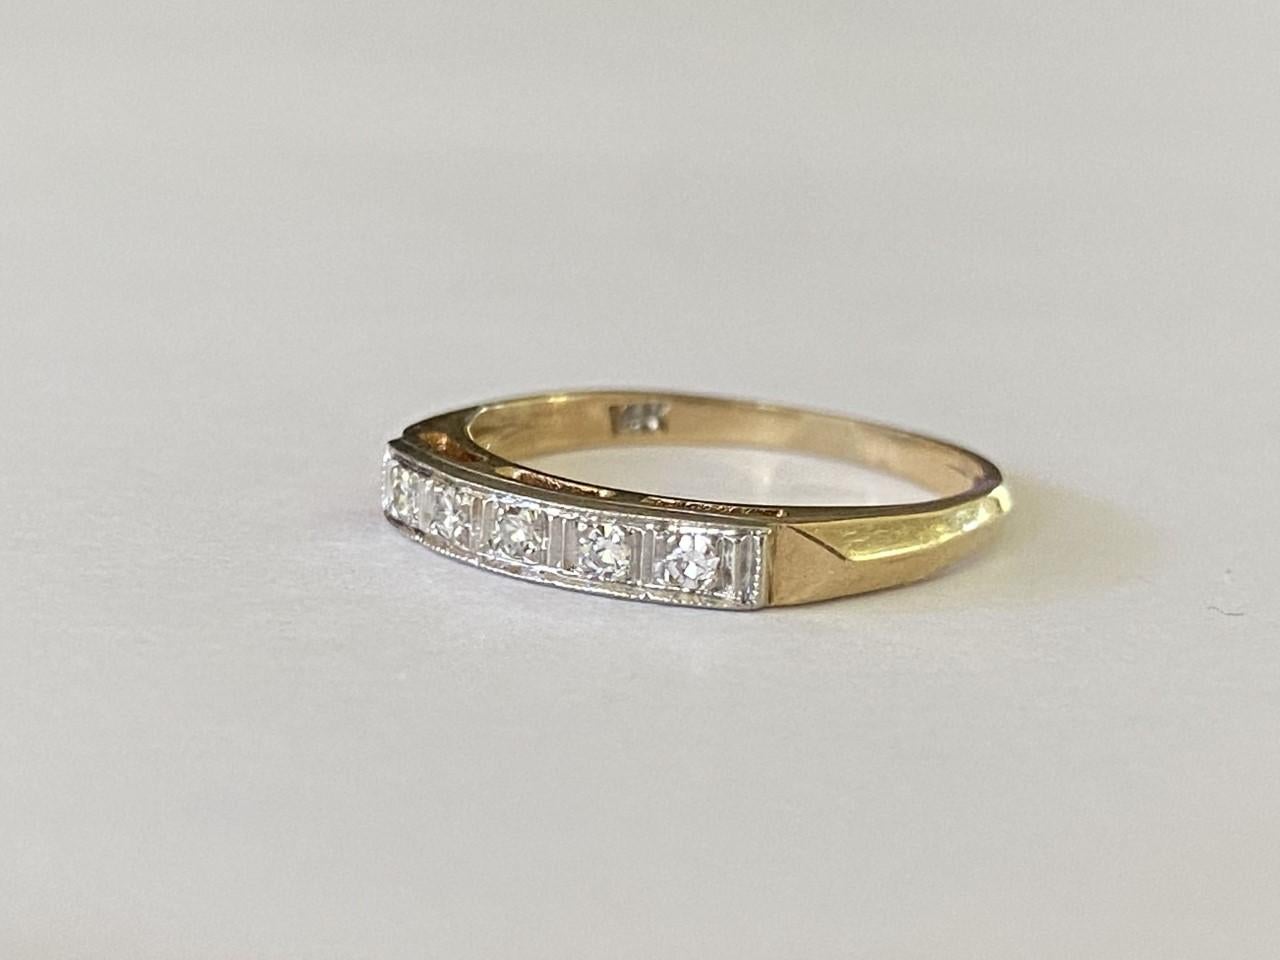 This vintage two-toned band features a row of five single cut diamonds totaling approximately 0.10 carats set in 14kt yellow and white gold. 